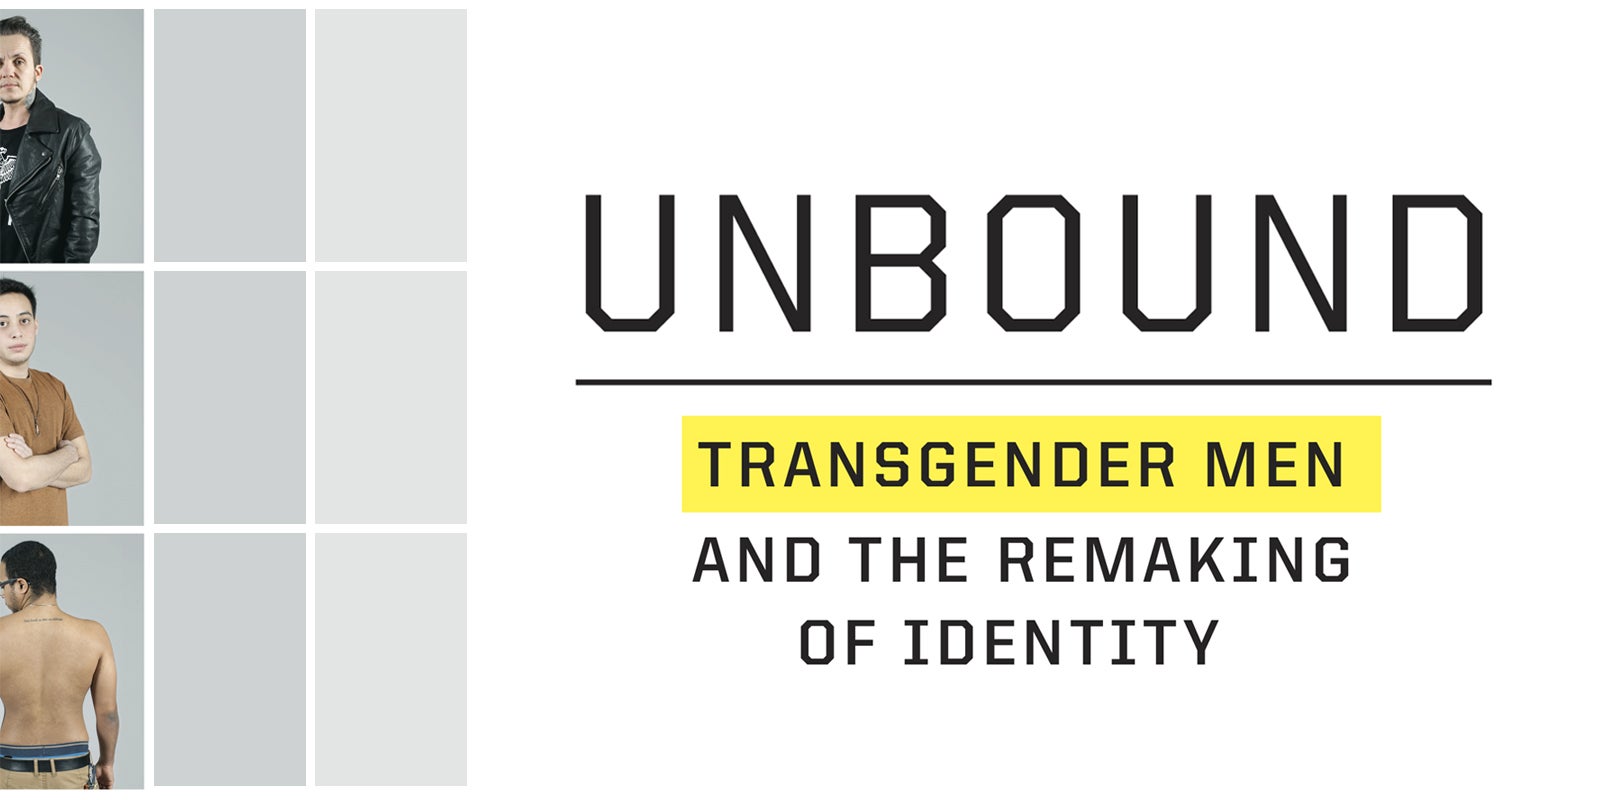 FROM THE PAGE: <i>Unbound: Transgender Men and the Remaking of Identity</i>